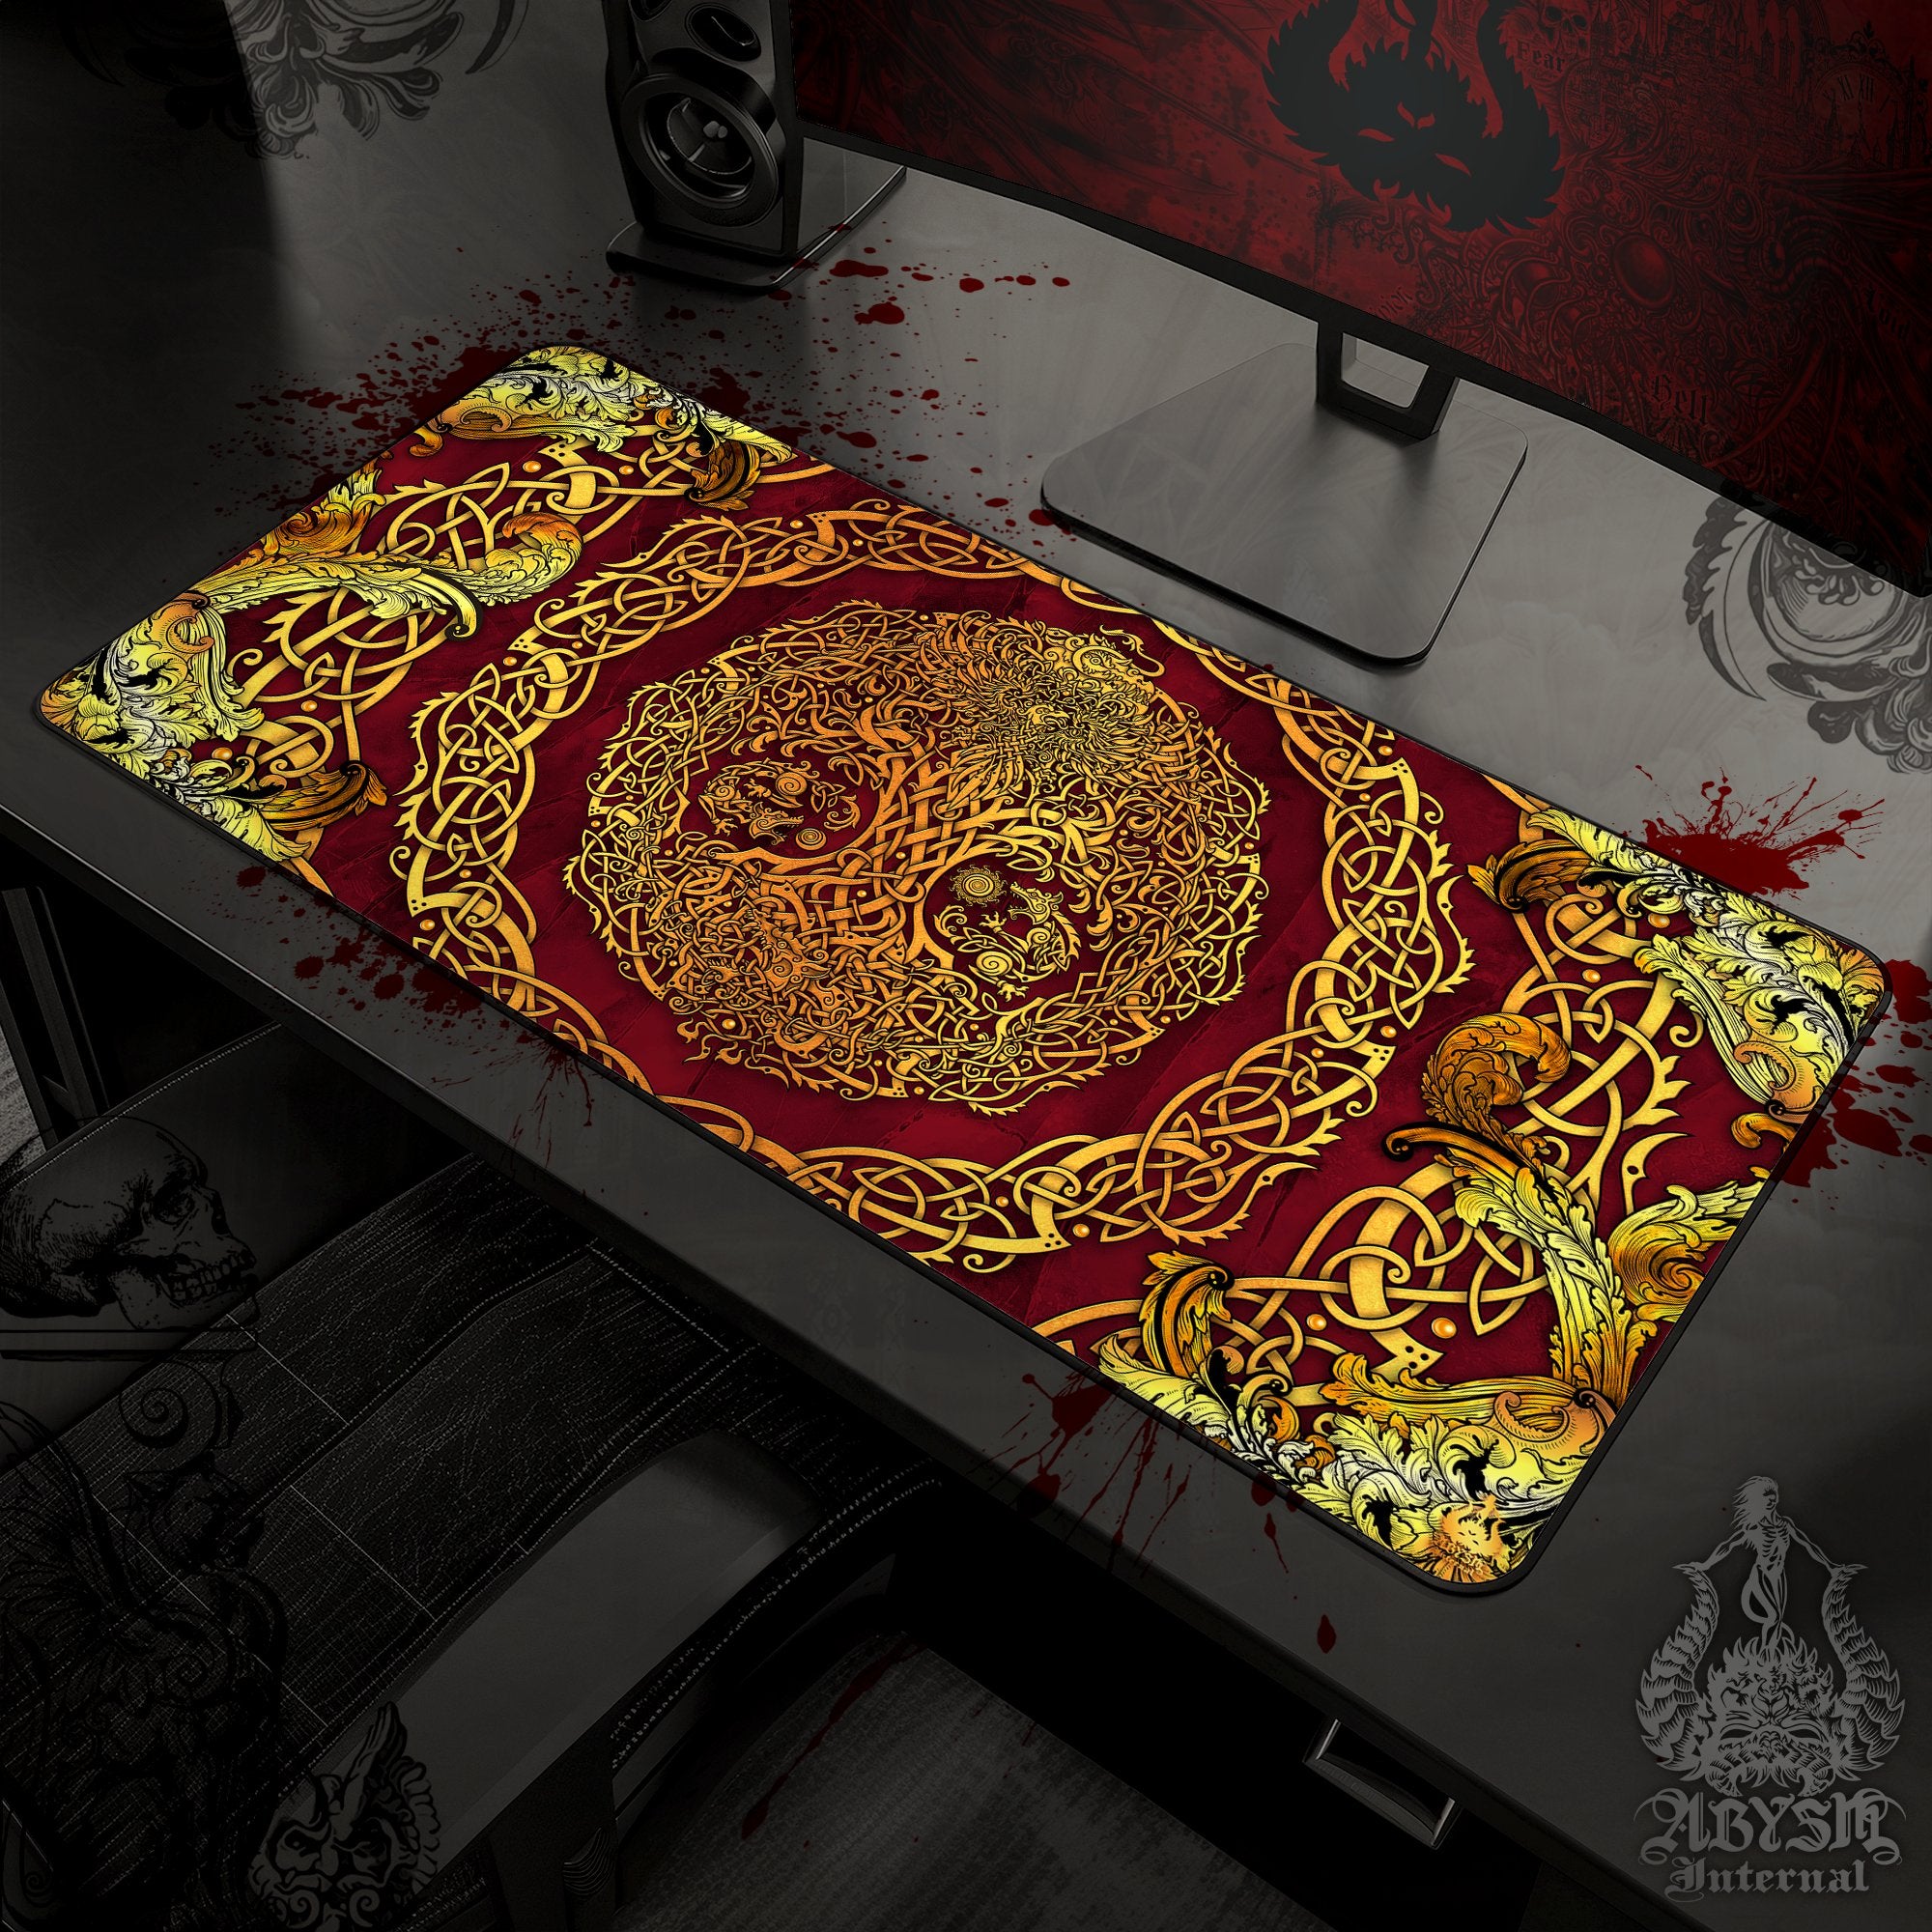 Gold Yggdrasil Desk Mat, Viking Gaming Mouse Pad, Norse Tree of Life Table Protector Cover, Knotwork Workpad, Nordic Art Print - 3 Colors - Abysm Internal